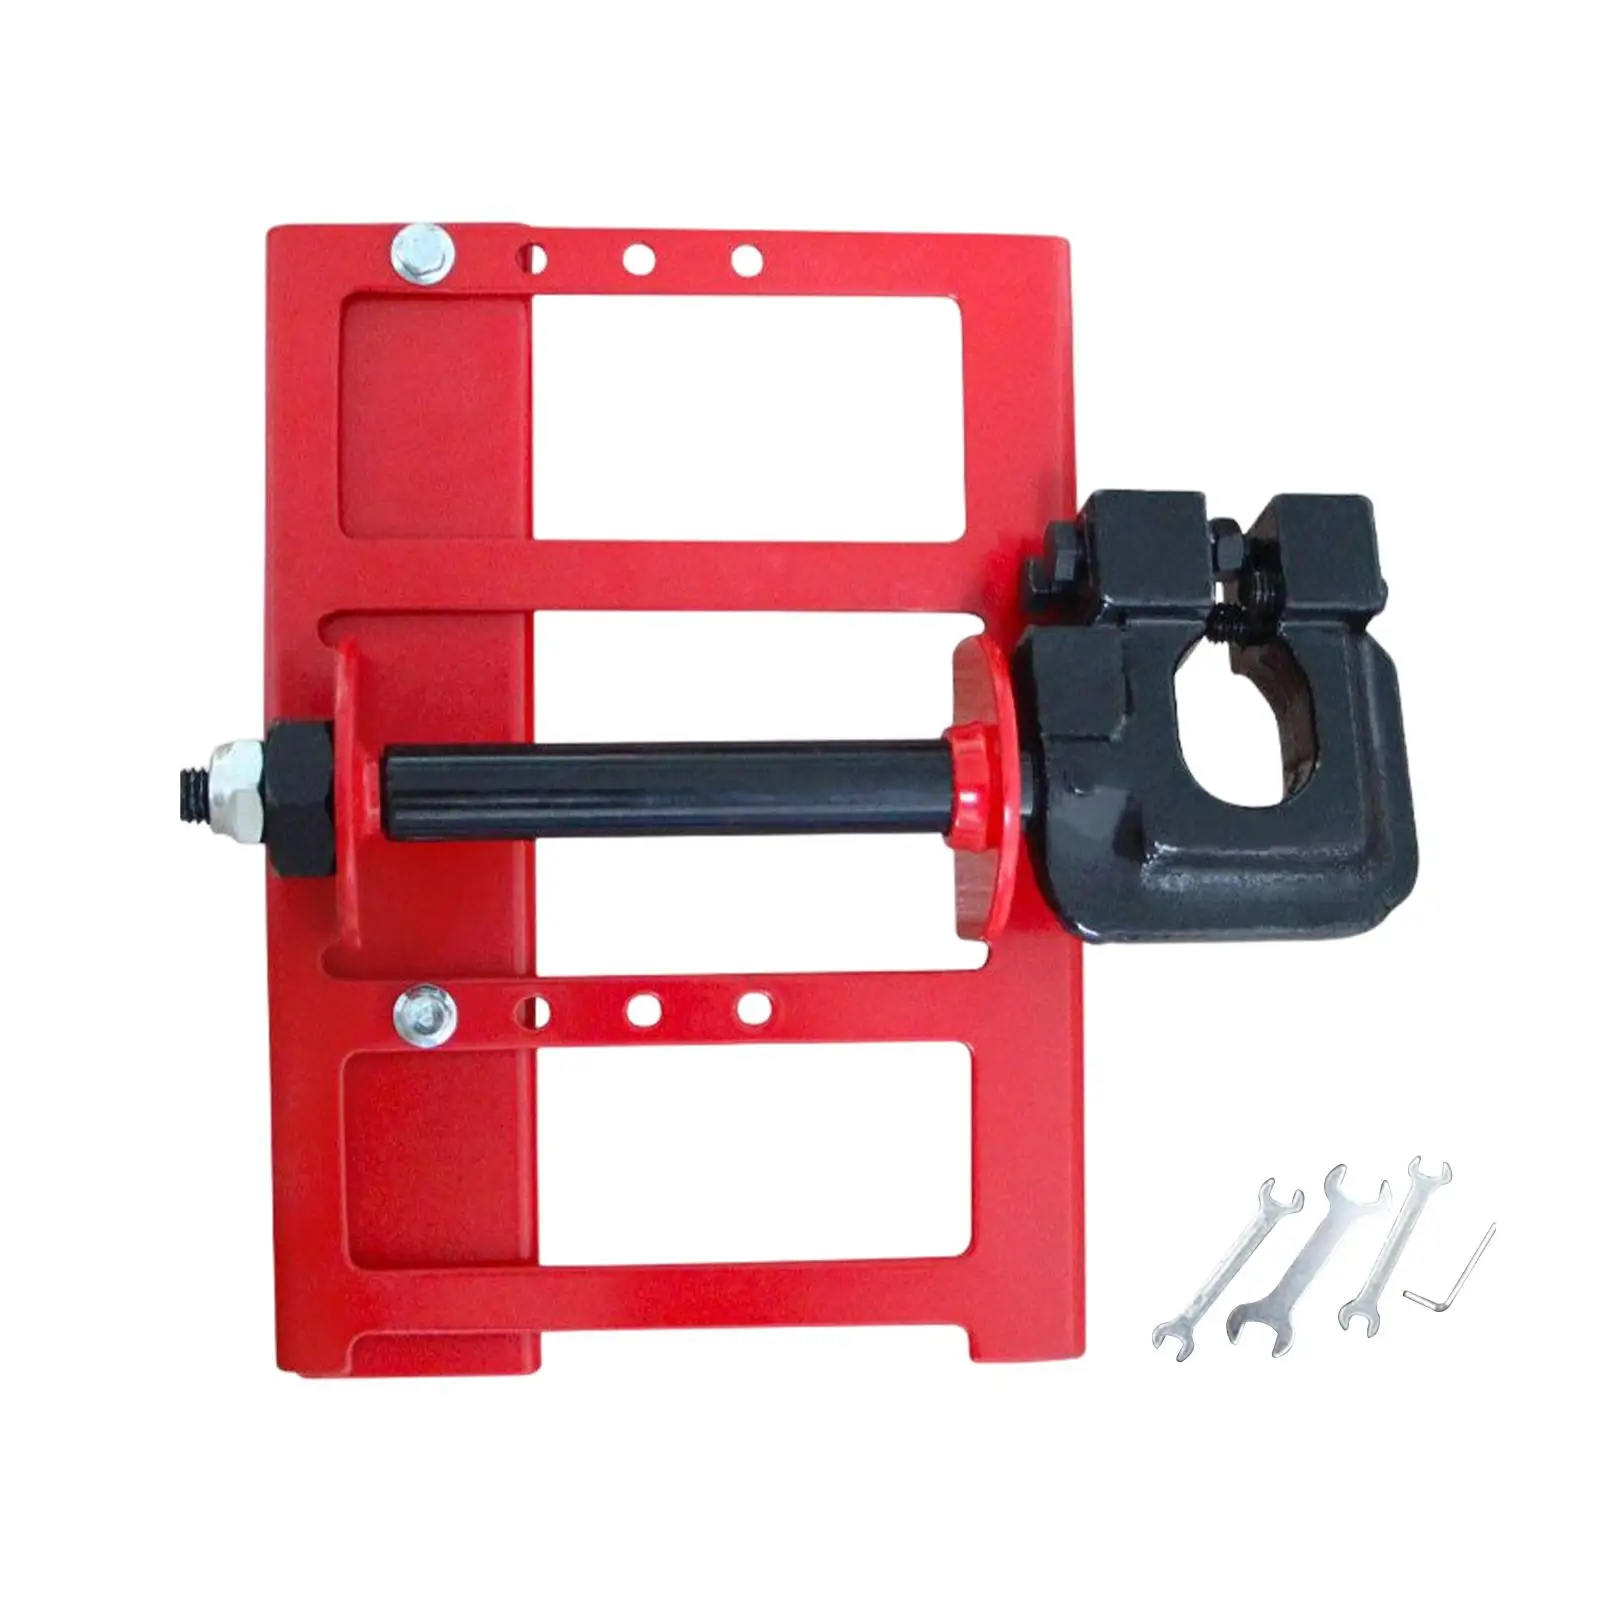 Chainsaw Portable Chainsaw Attachment Accs Milling Vertical Cutting Guide Portable Sawmill for Construction Workers